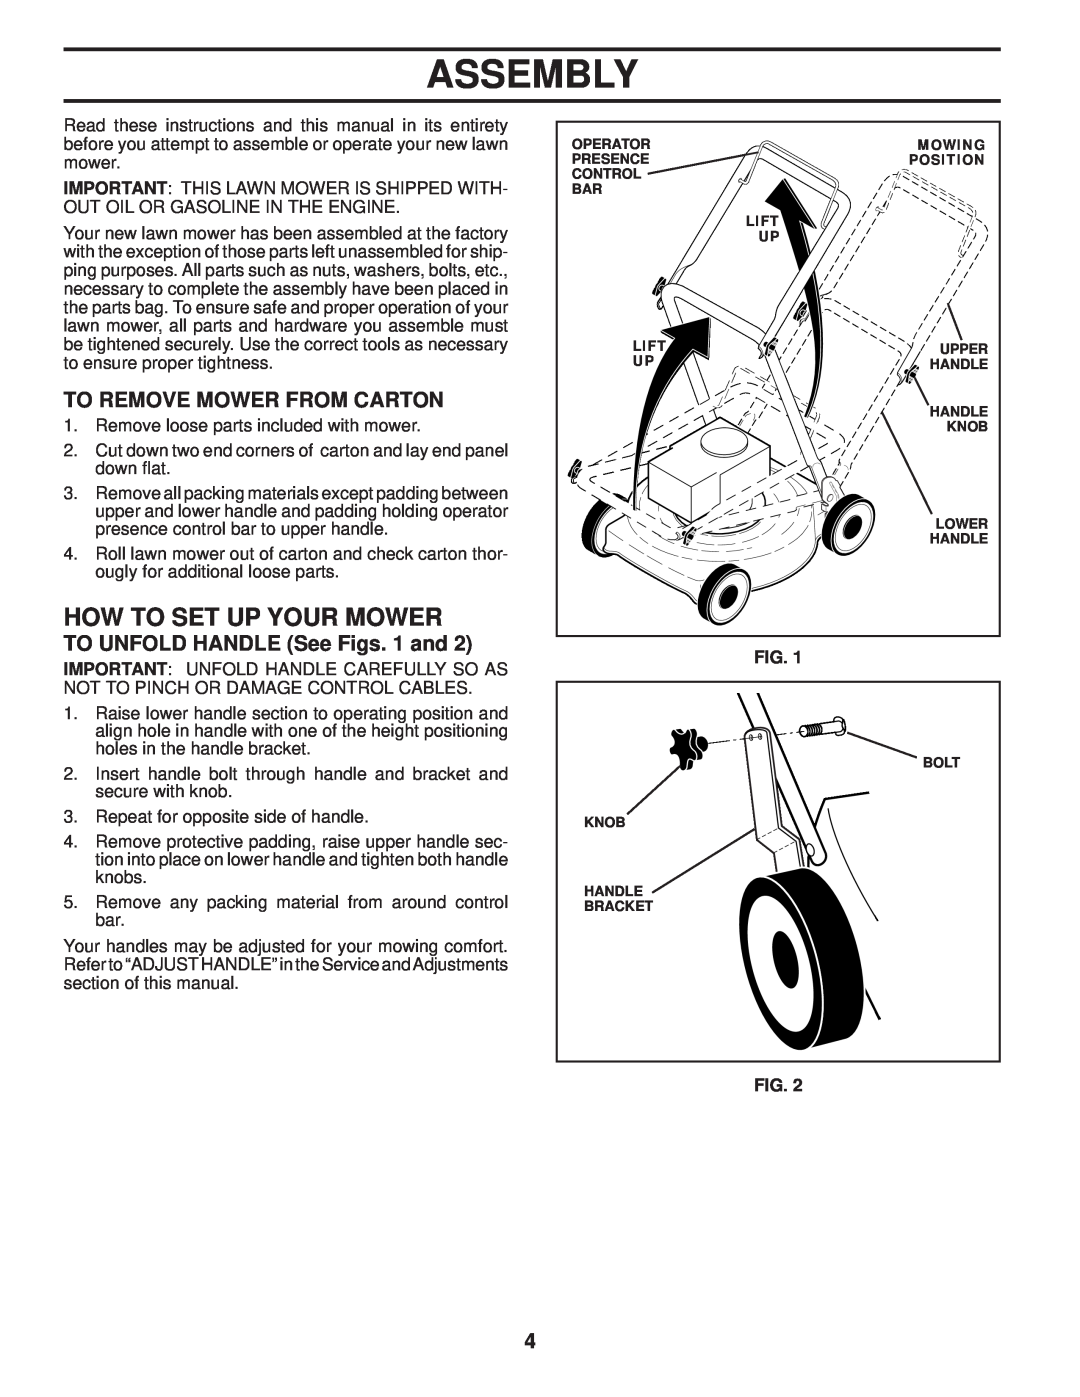 Husqvarna 87521HVE Assembly, How To Set Up Your Mower, To Remove Mower From Carton, TO UNFOLD HANDLE See Figs. 1 and 